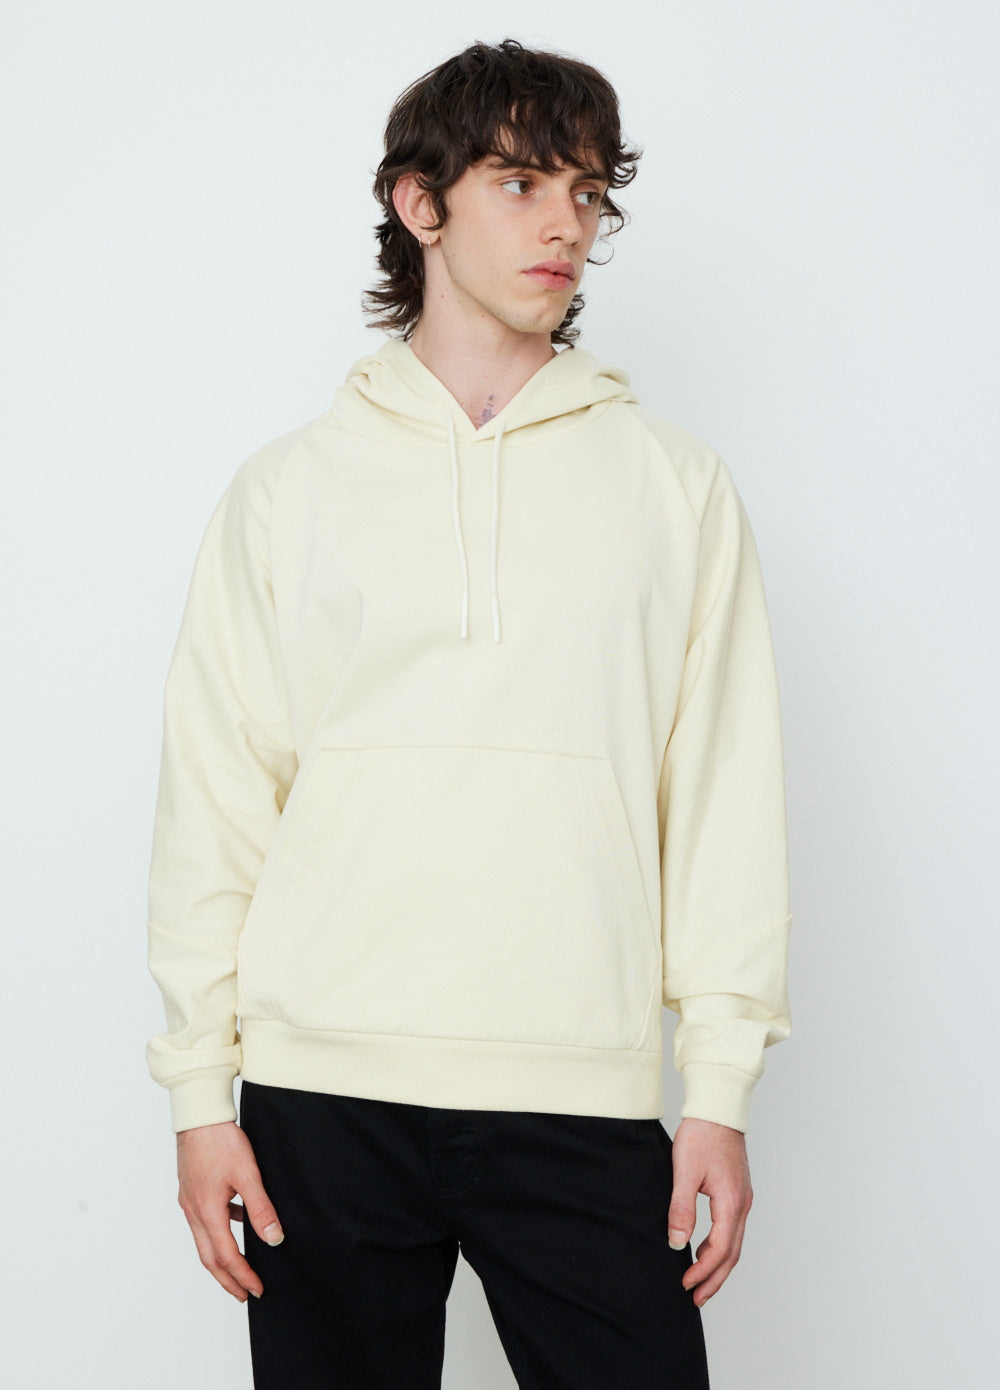 ESC Knit Pullover Hoodie